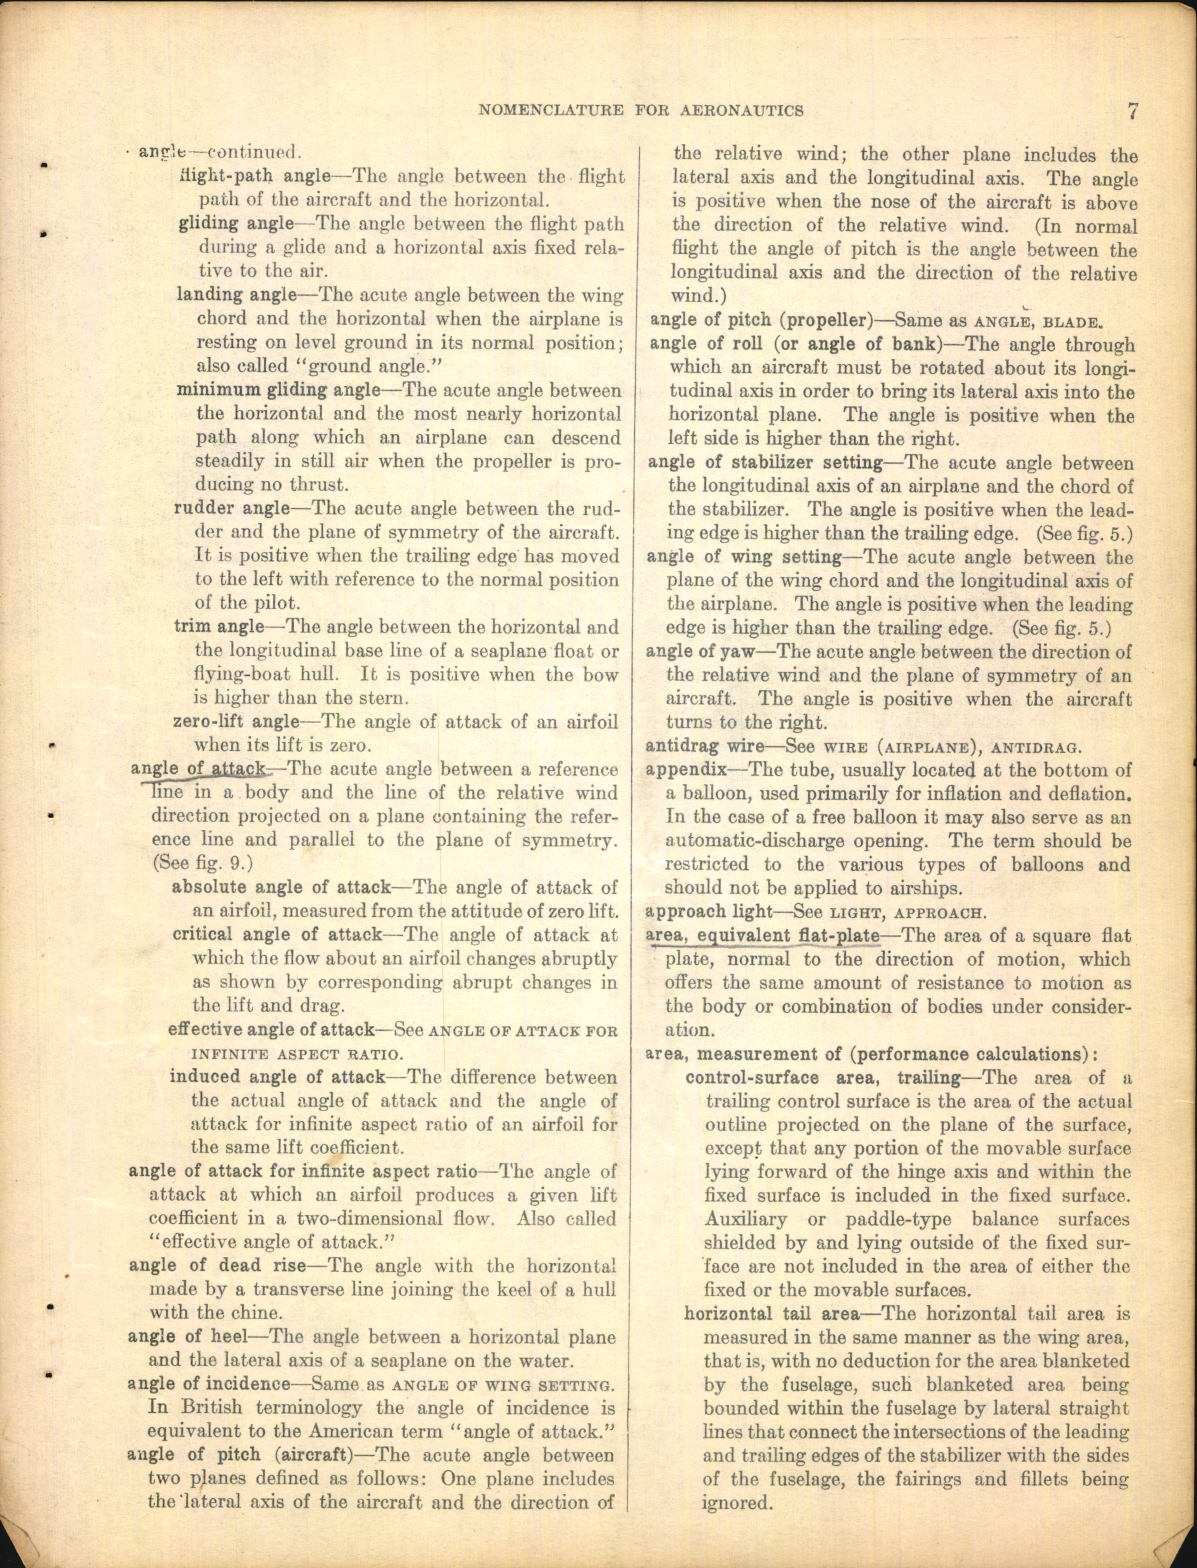 Sample page 7 from AirCorps Library document: The Air Corps Technical School; Nomenclature for Aeronautics 